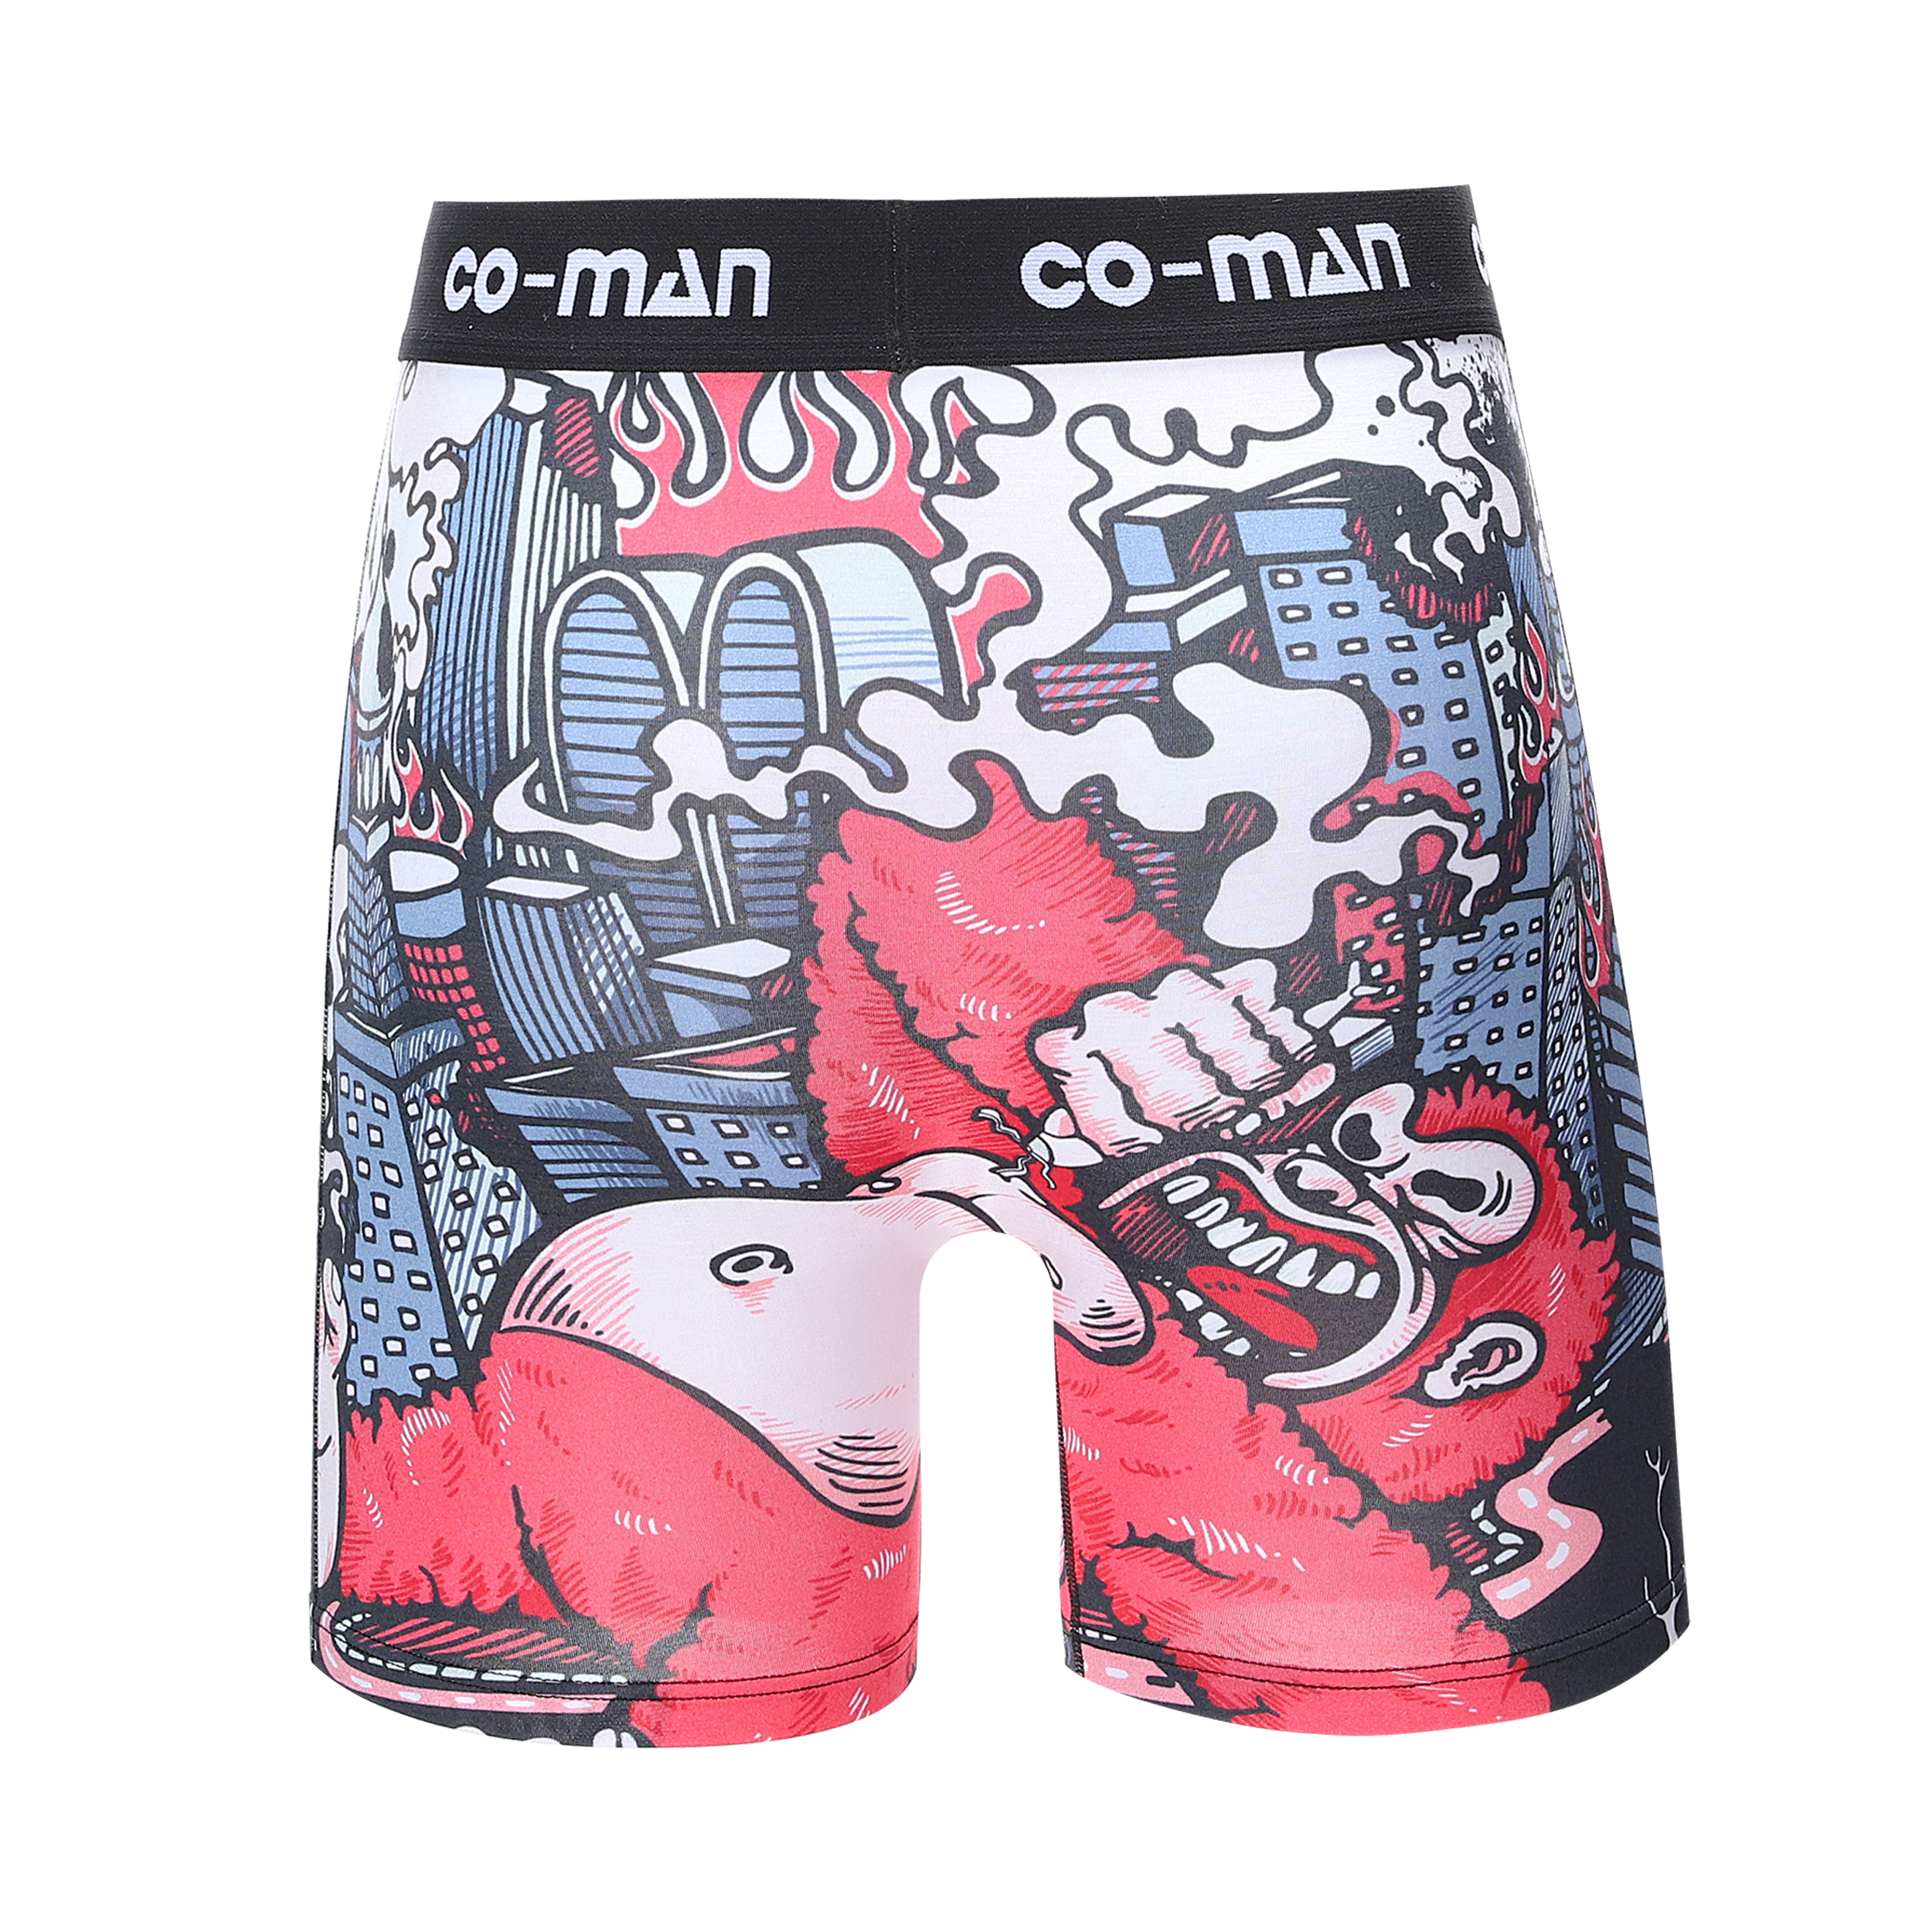 Custom sublimation printed boxer briefs with jacquard waistband